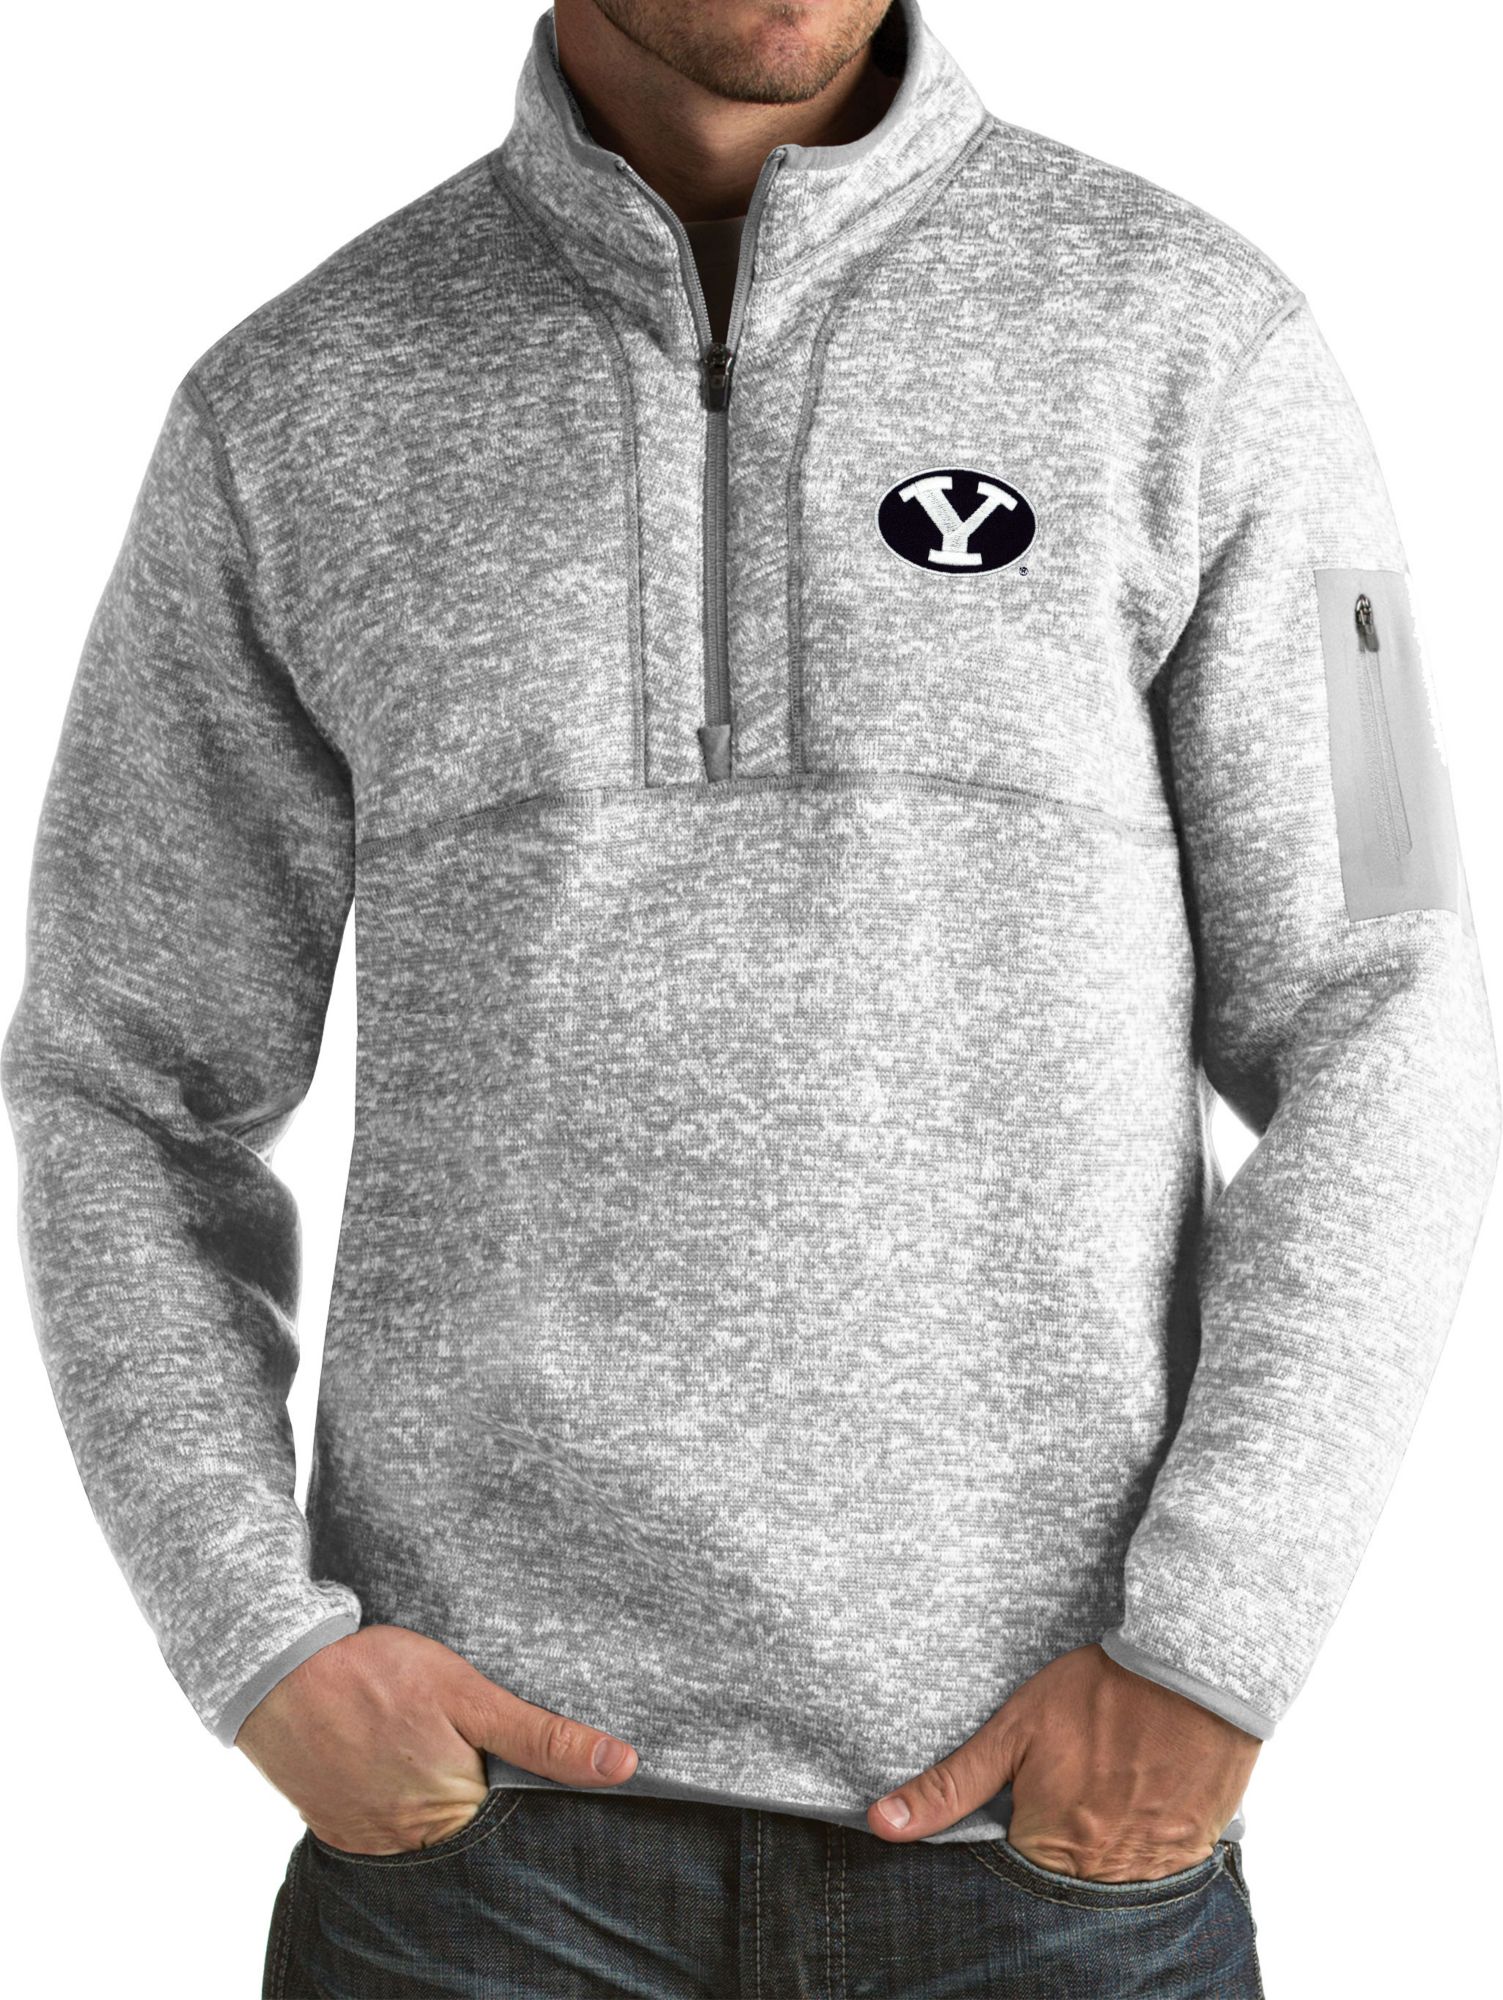 Antigua Men's BYU Cougars Grey Fortune Pullover Jacket